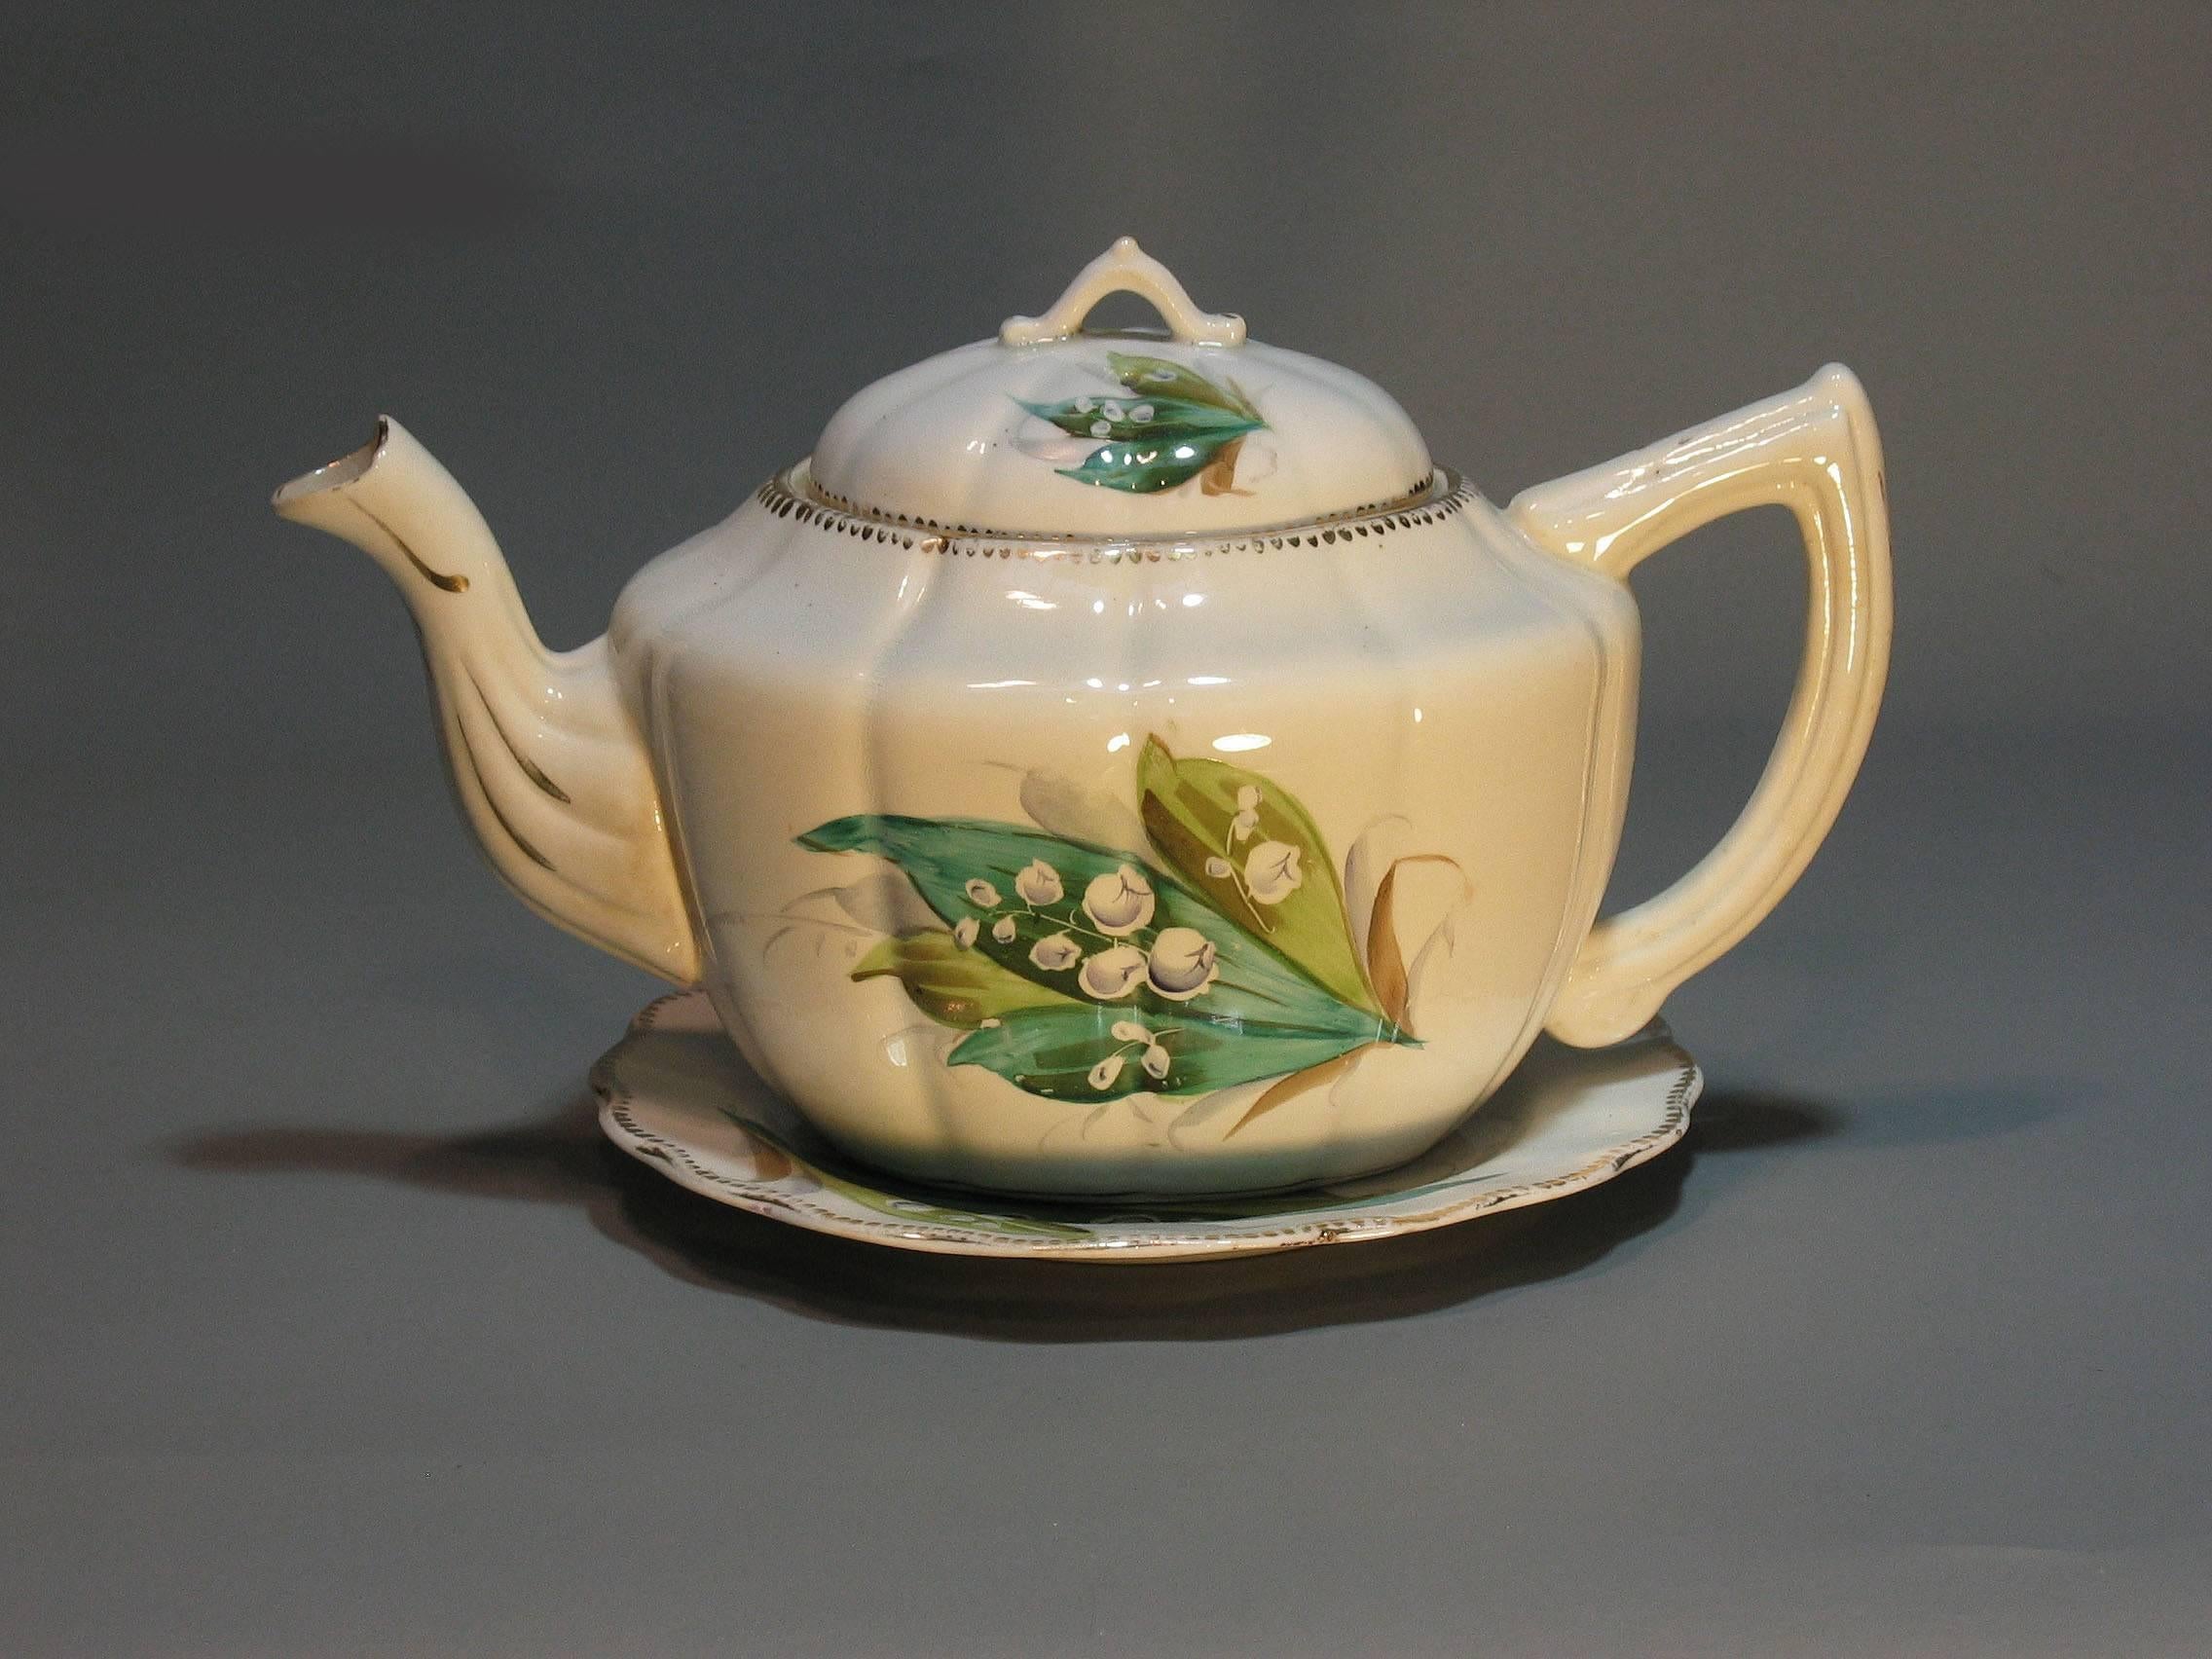 International Style Staffordshire Porcelain Part Tea and Dessert Service, First Half of 19th Century